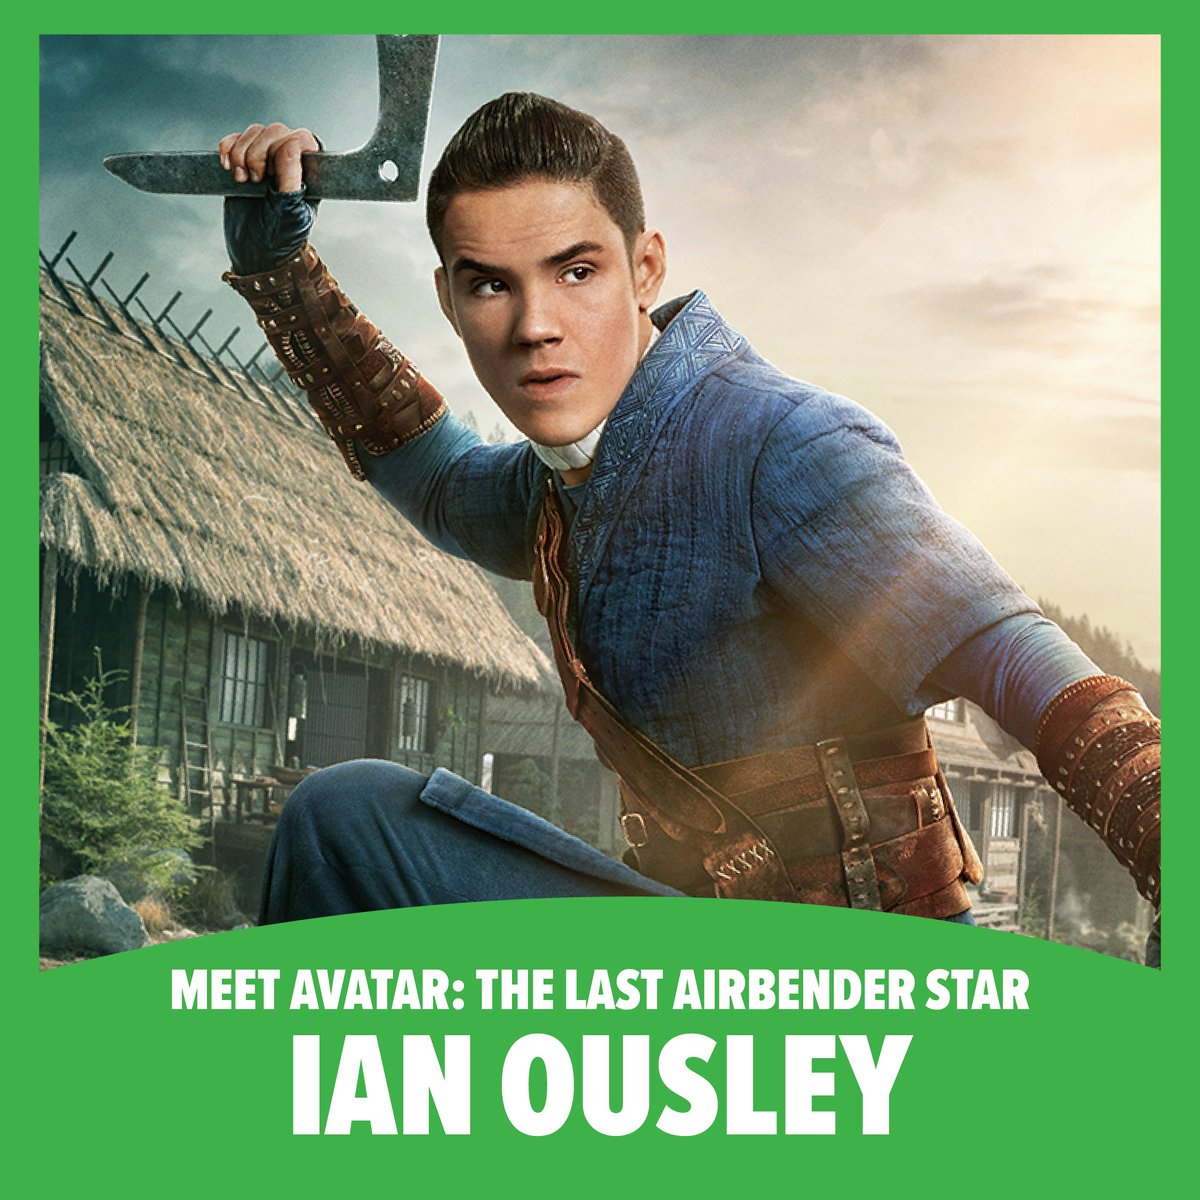 Did somebody call for a Water Tribe warrior? Meet Ian Ousley (Sokka) from Netflix's Avatar: The Last Airbender at FAN EXPO Philadelphia next month🌊 Grab your tickets today. spr.ly/6016wU3eo